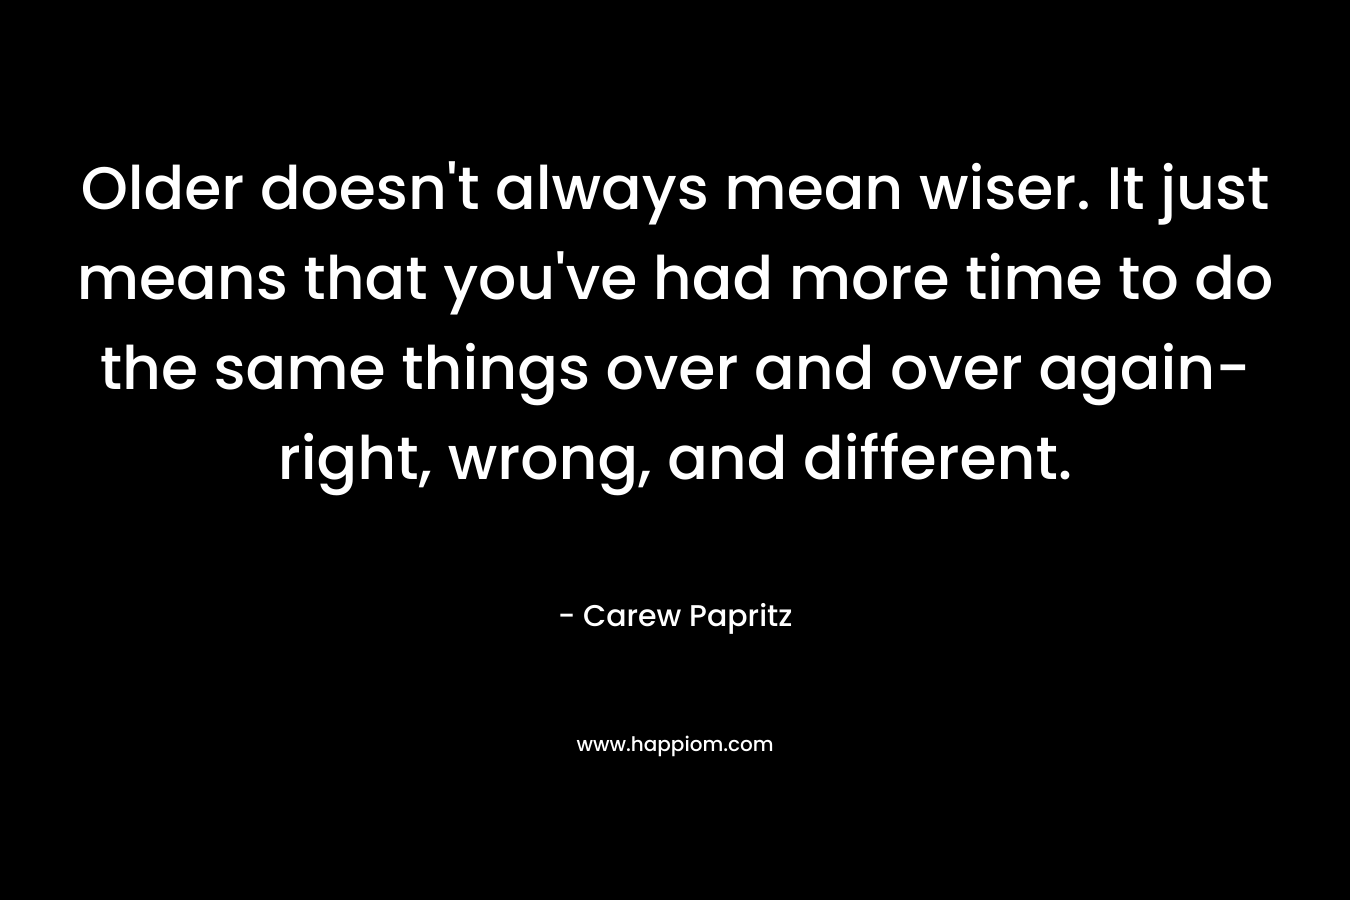 Older doesn't always mean wiser. It just means that you've had more time to do the same things over and over again- right, wrong, and different.